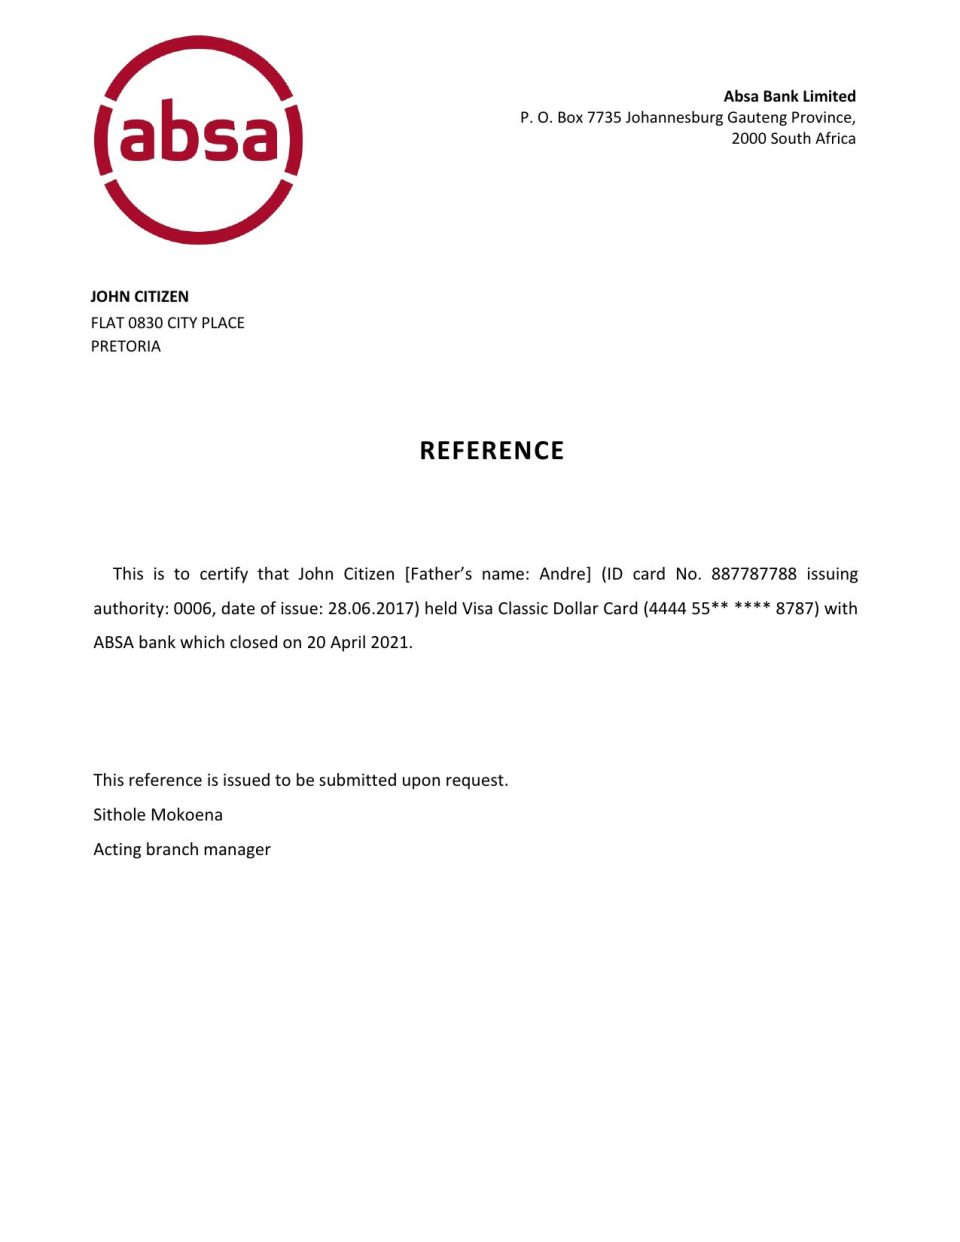 Download South Africa ABSA Bank Reference Letter Templates | Editable Word